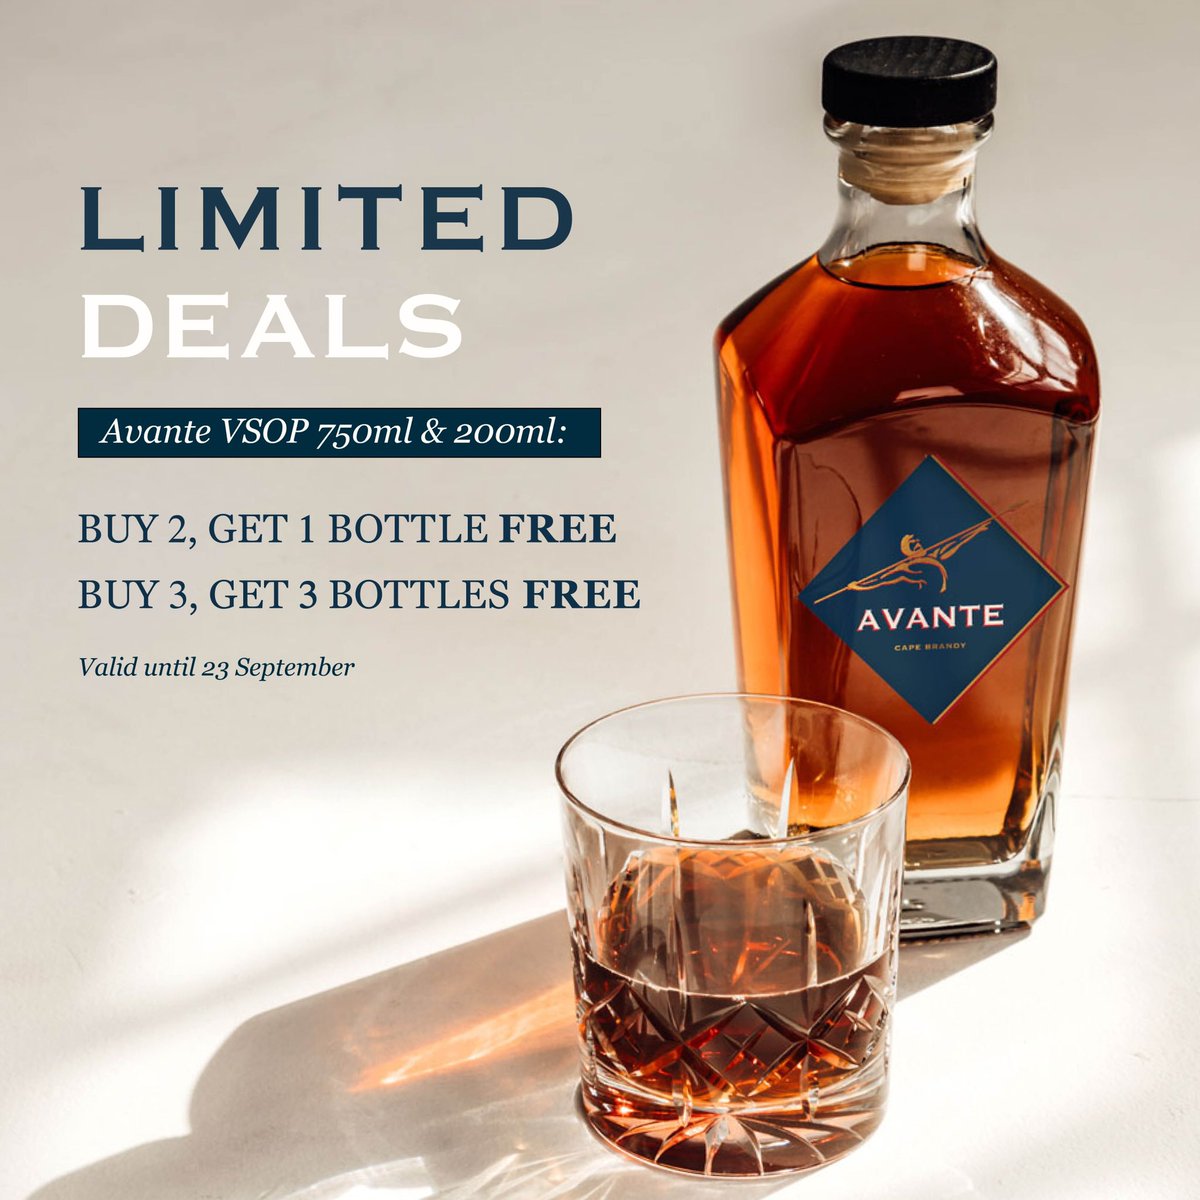 Our pre-sale campaign ends at 9pm CAT, Sat 23 Sept, just before kick-off. It is your last chance to grab amazing deals on world class brandy and join the #AvanteGuarde and stand a chance to win the last 2 tix + flights to RWC 2023 check out bit.ly/AvanteBrandy #AvanteBrandy